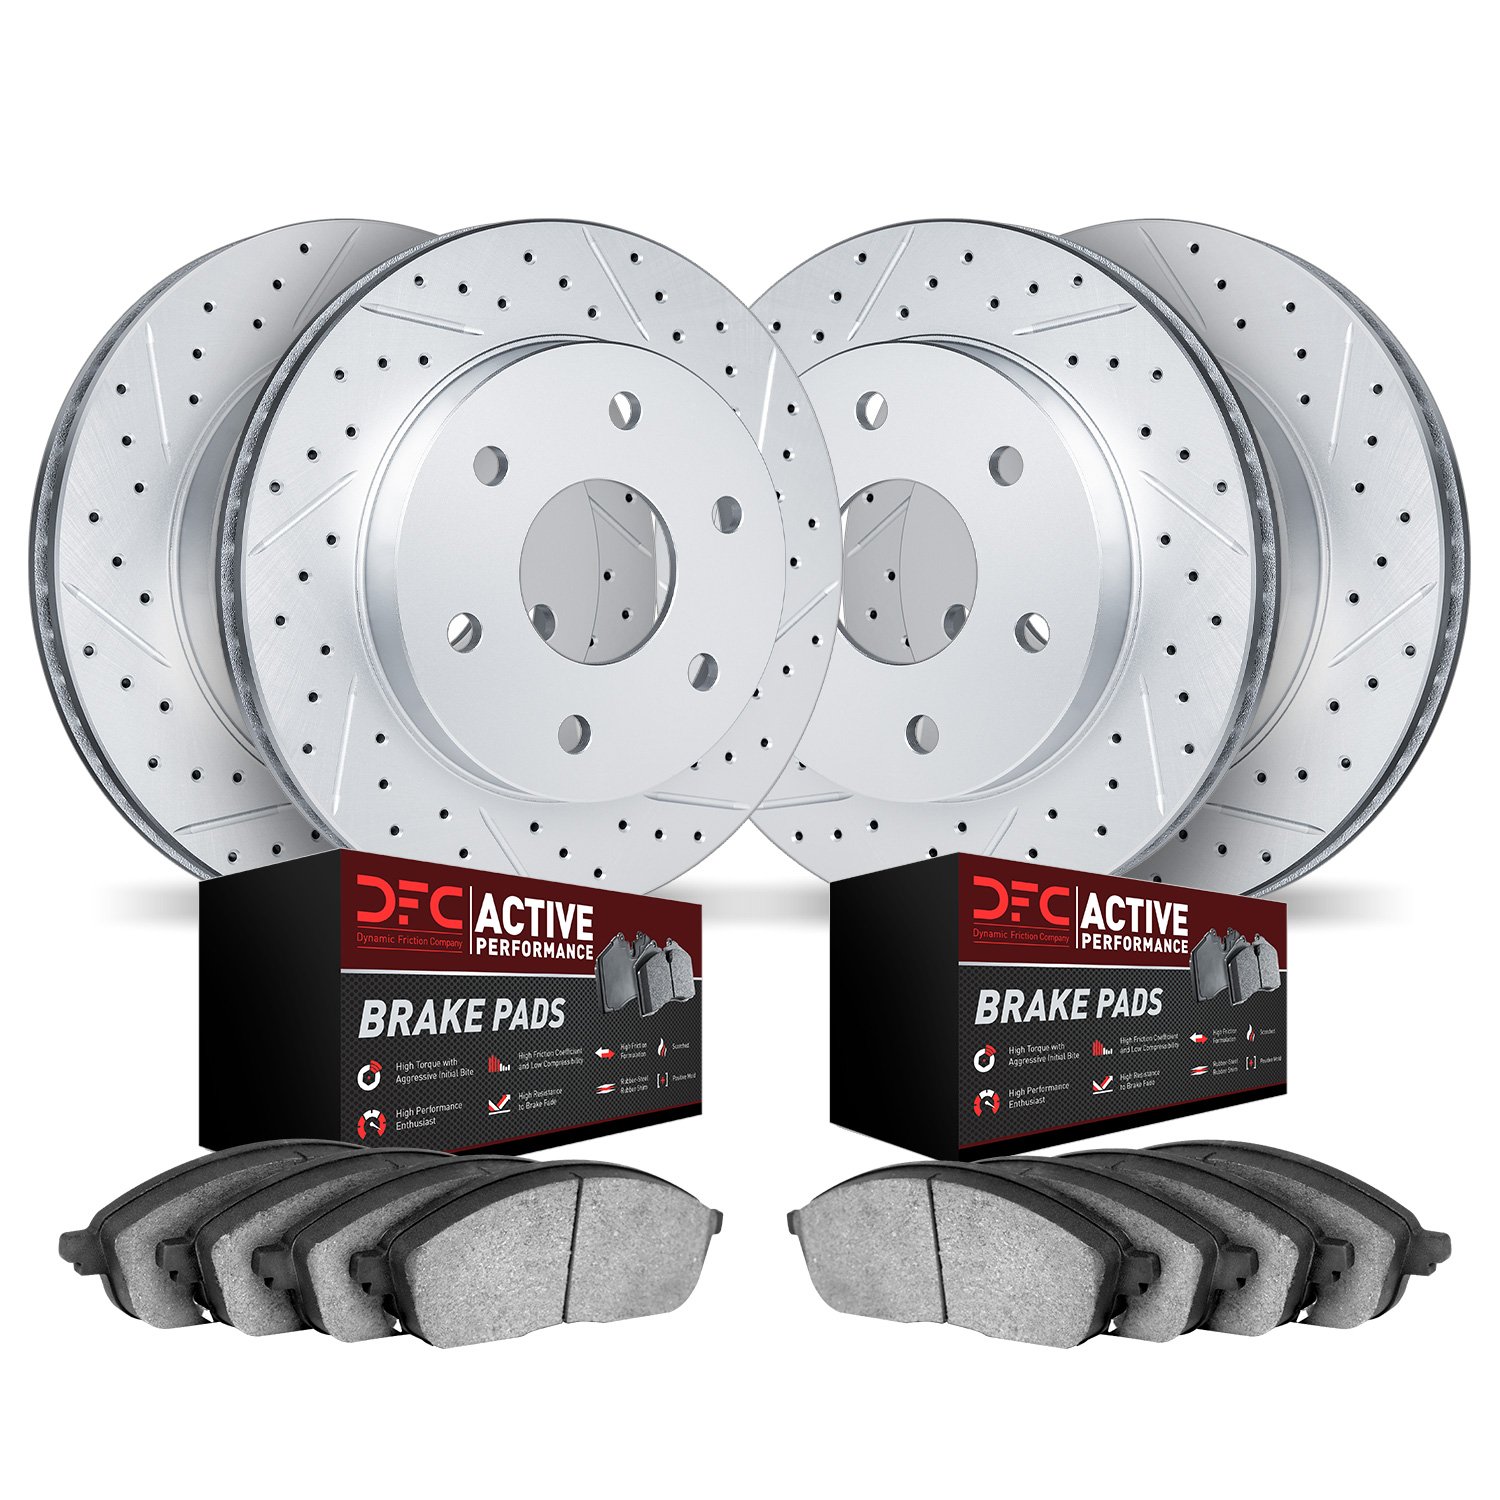 2704-40000 Geoperformance Drilled/Slotted Brake Rotors with Active Performance Pads Kit, 2003-2017 Mopar, Position: Front and Re